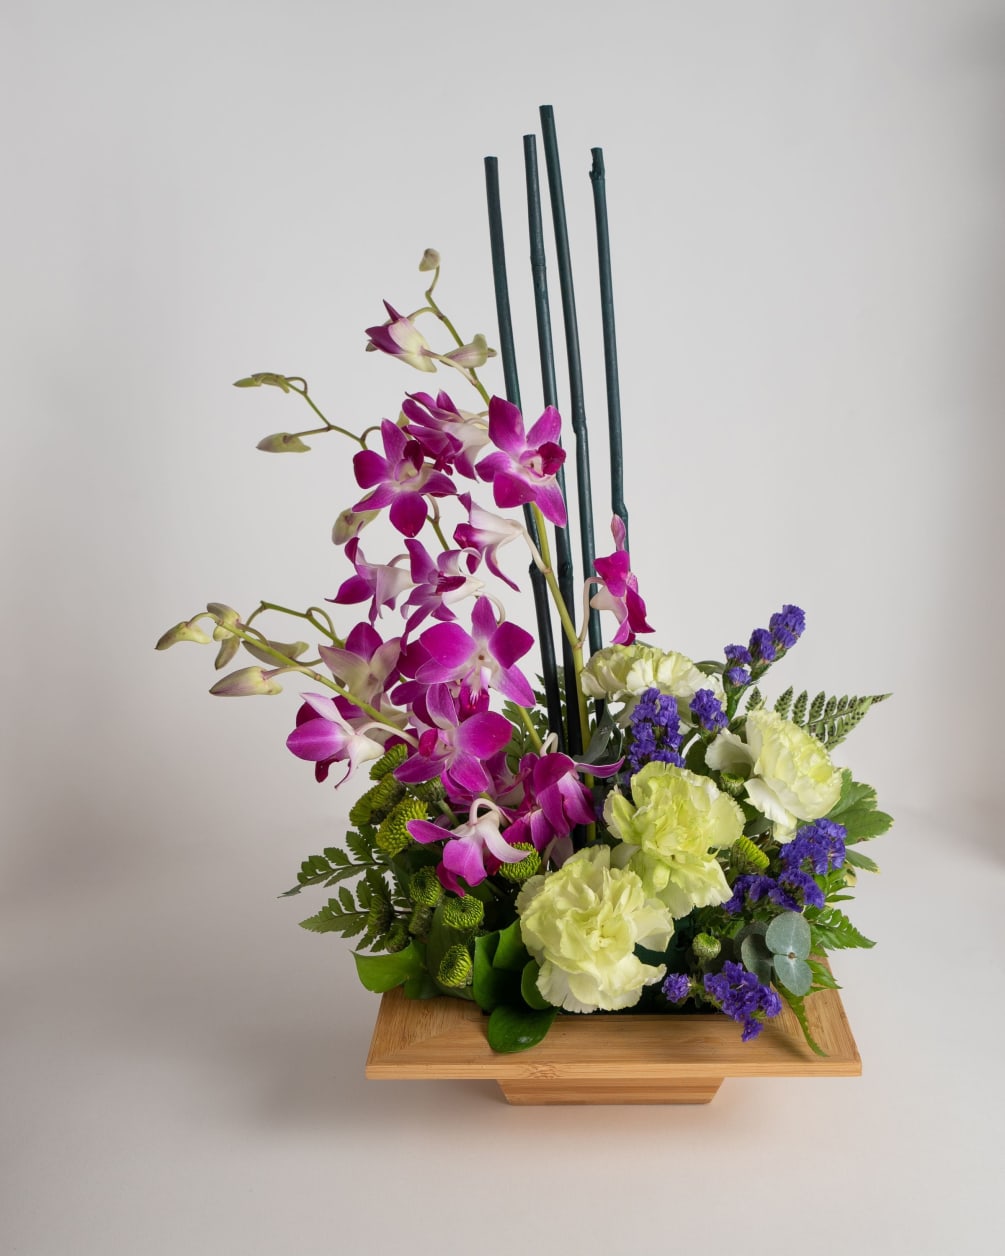 A dazzling display of Dendrobium Orchids in a bed of complimentary flowers.